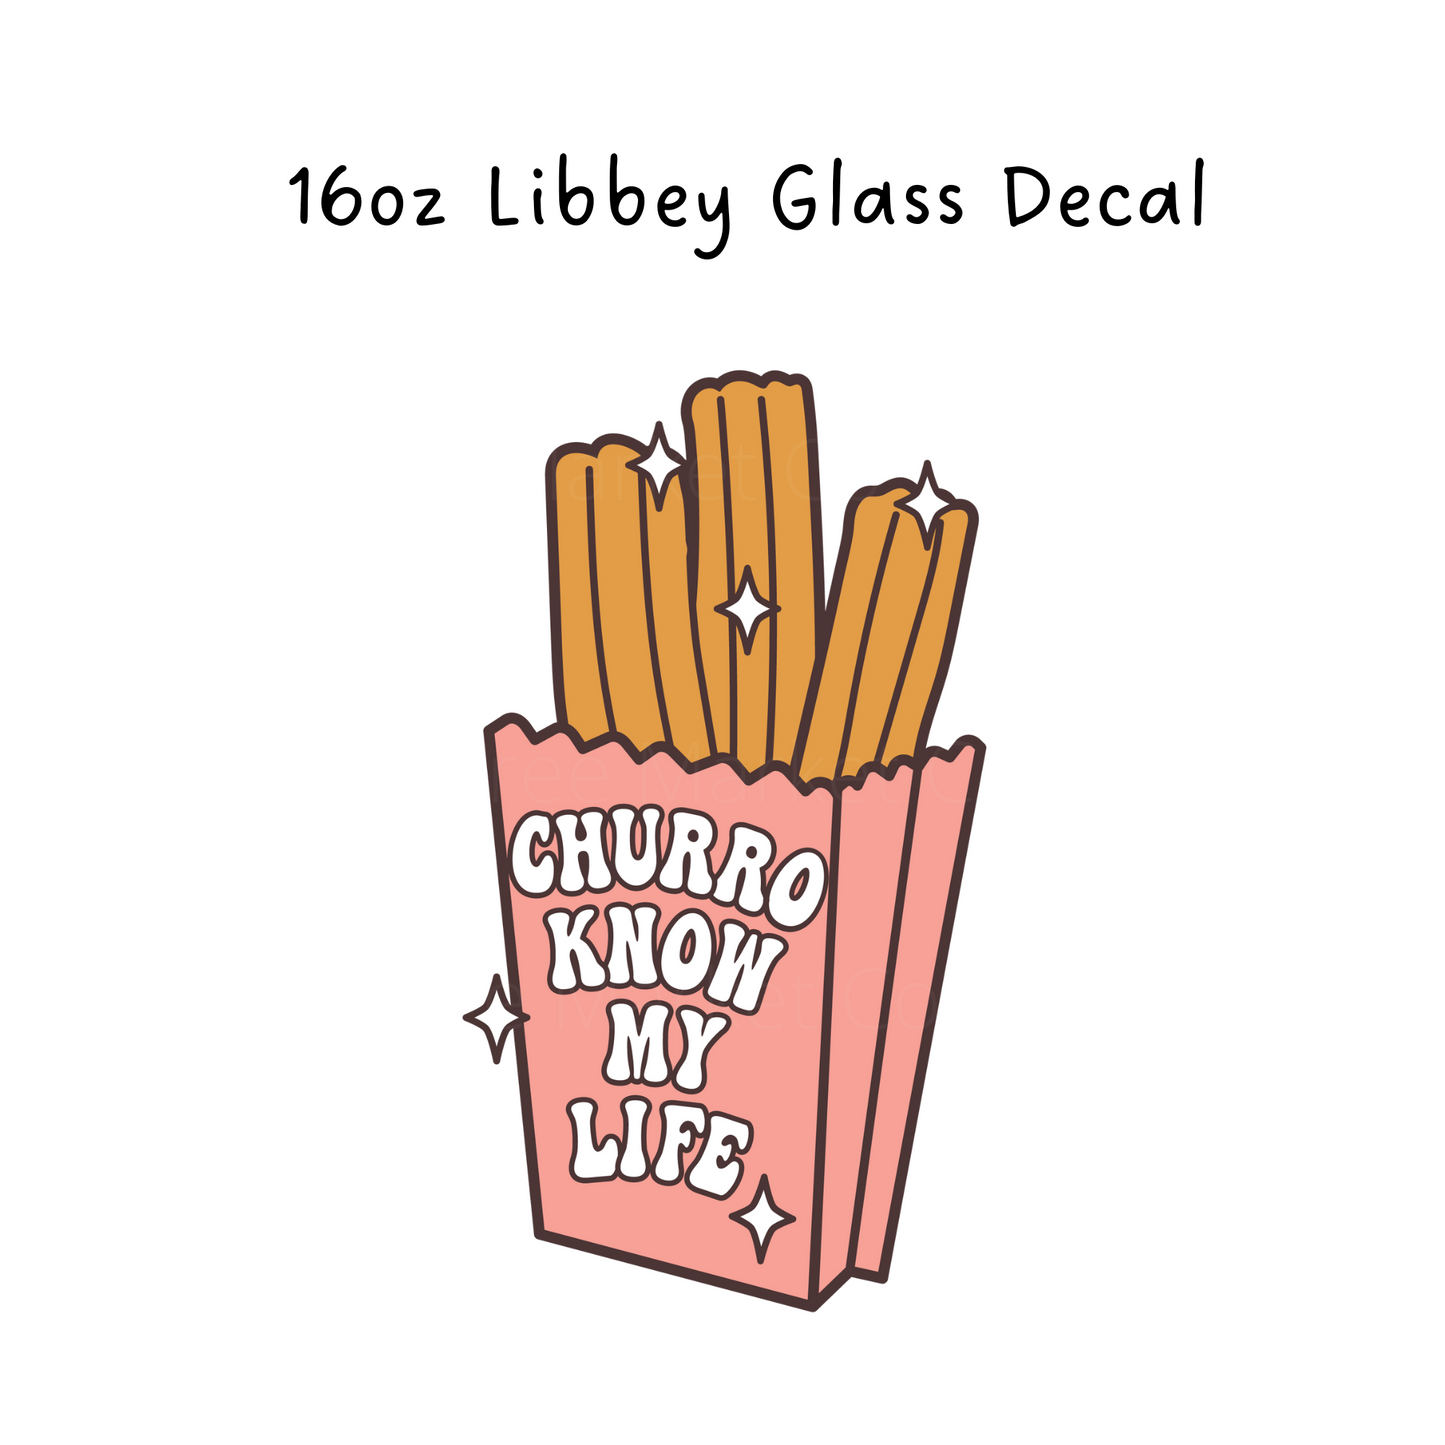 Churro Know my life  Libbey Beer Glass Decal